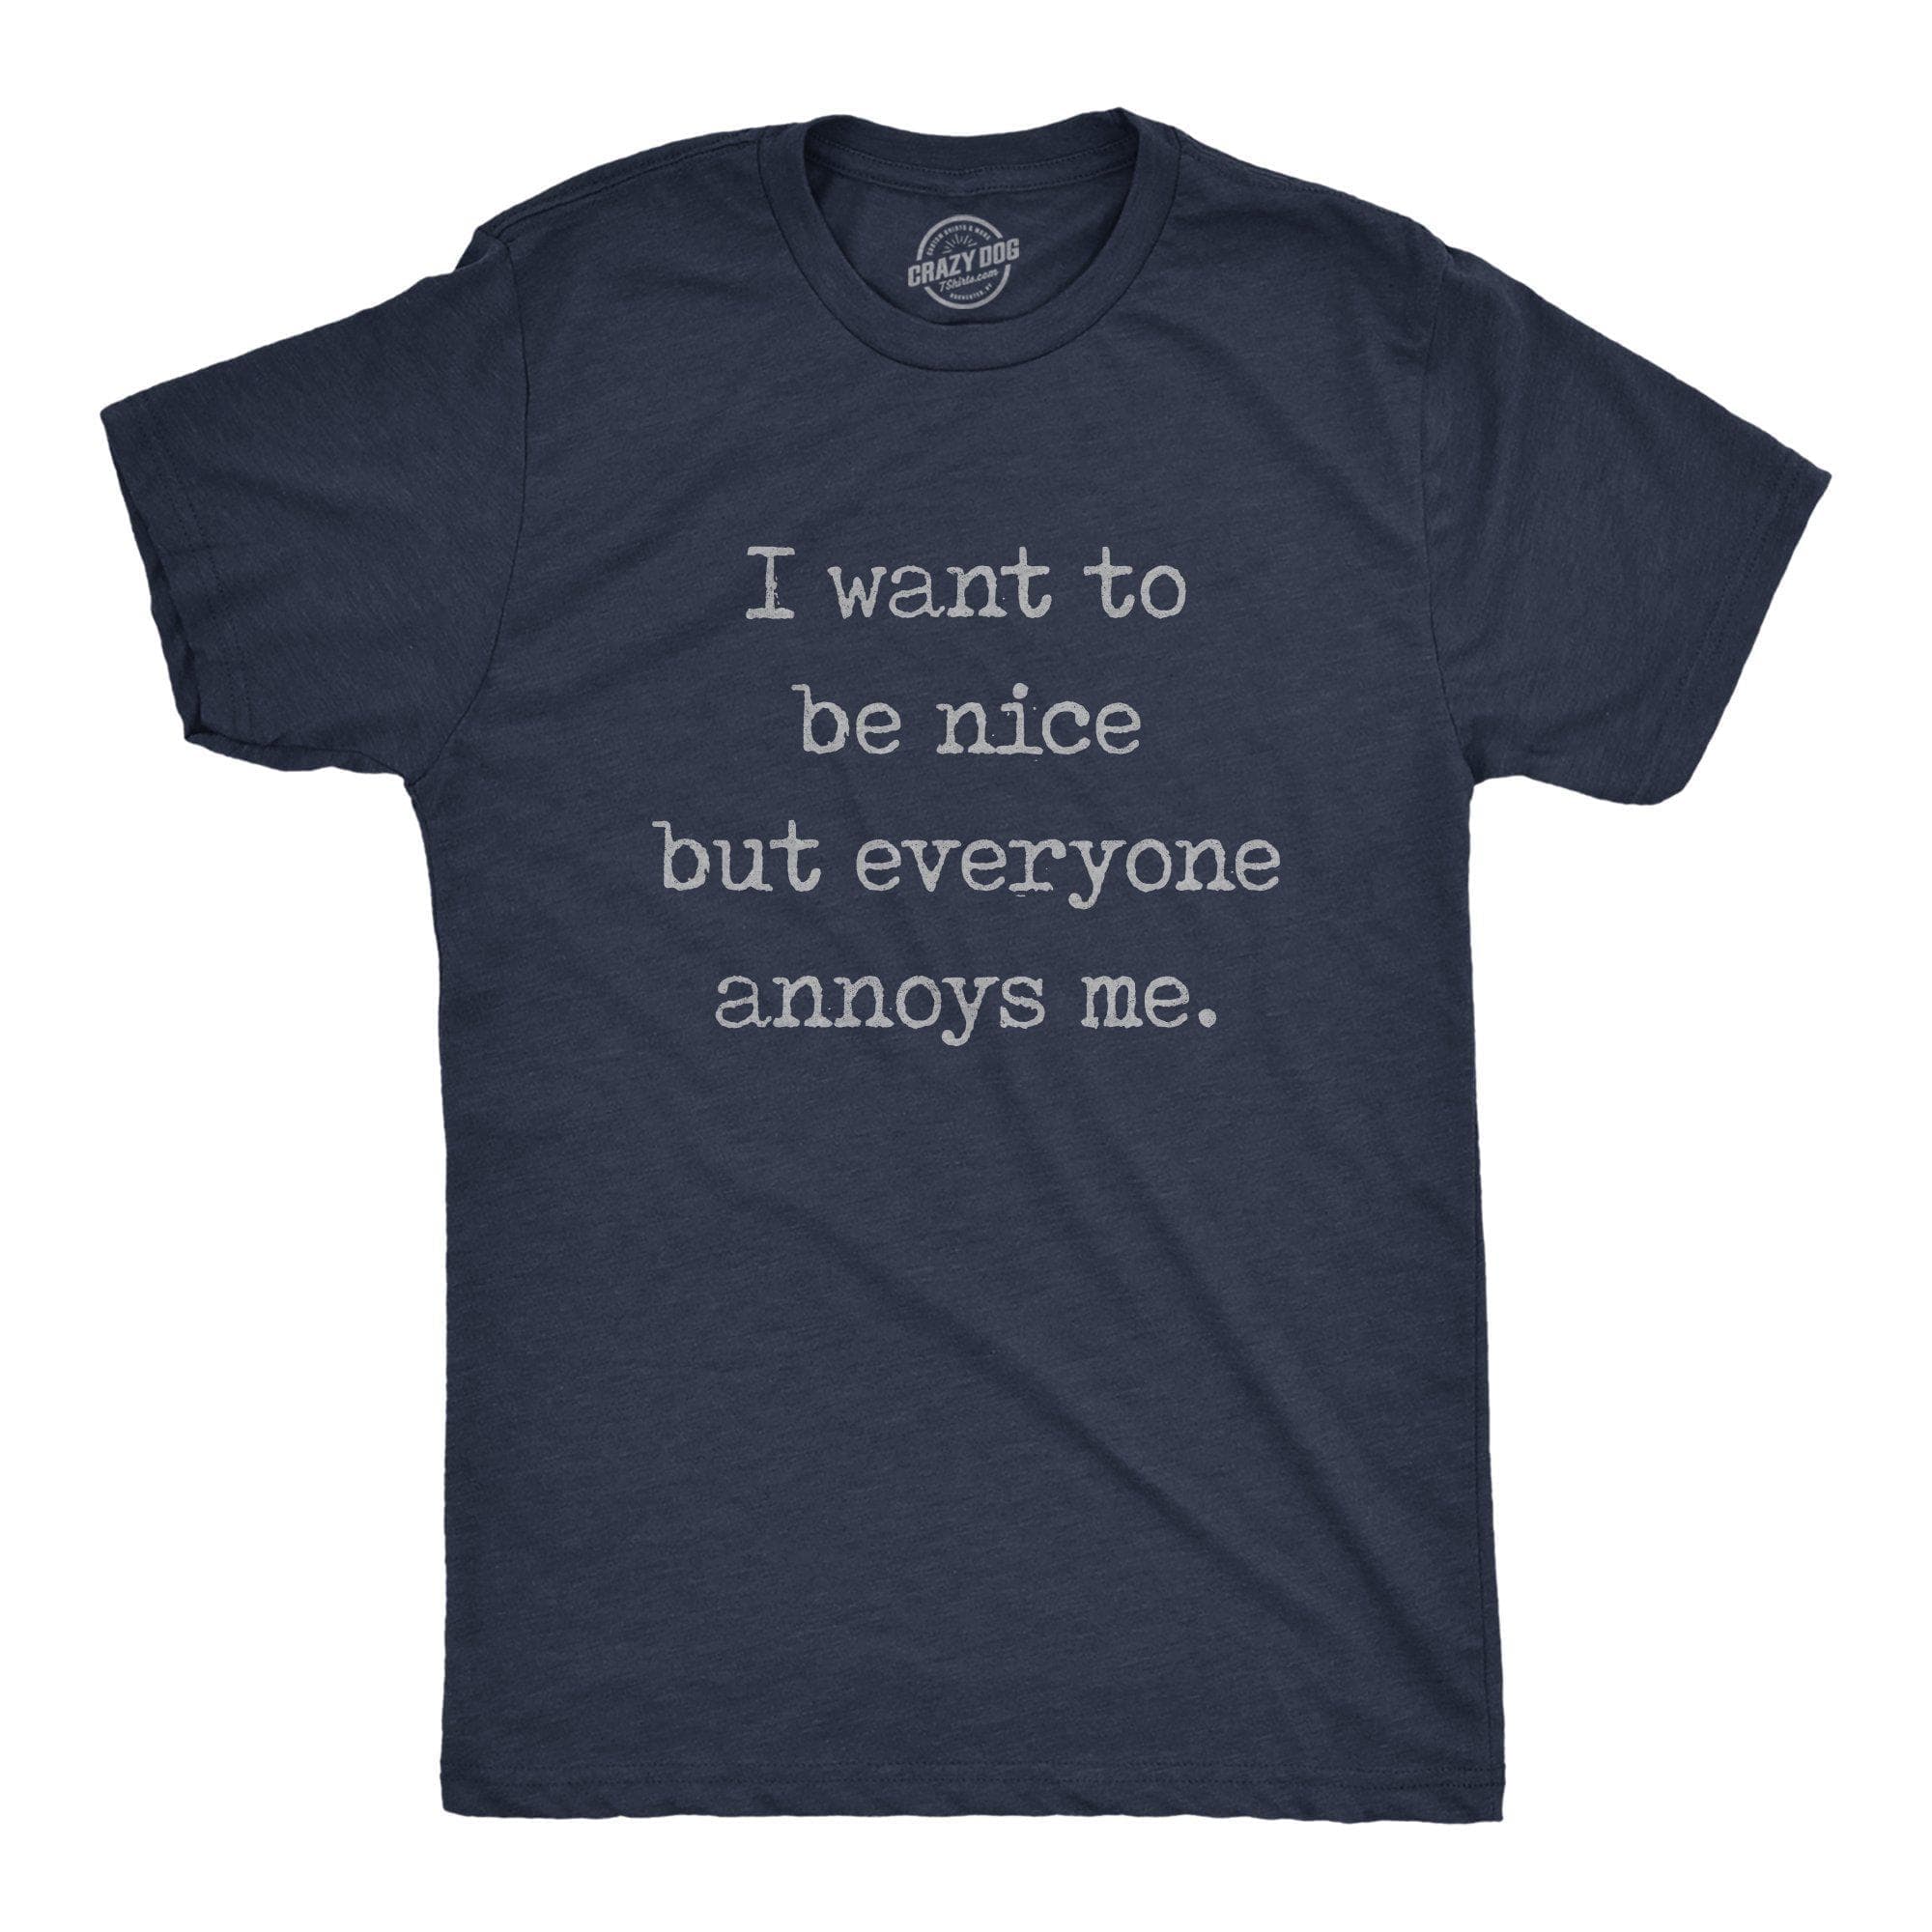 I Want To Be Nice But Everyone Annoys Me Men's Tshirt - Crazy Dog T-Shirts